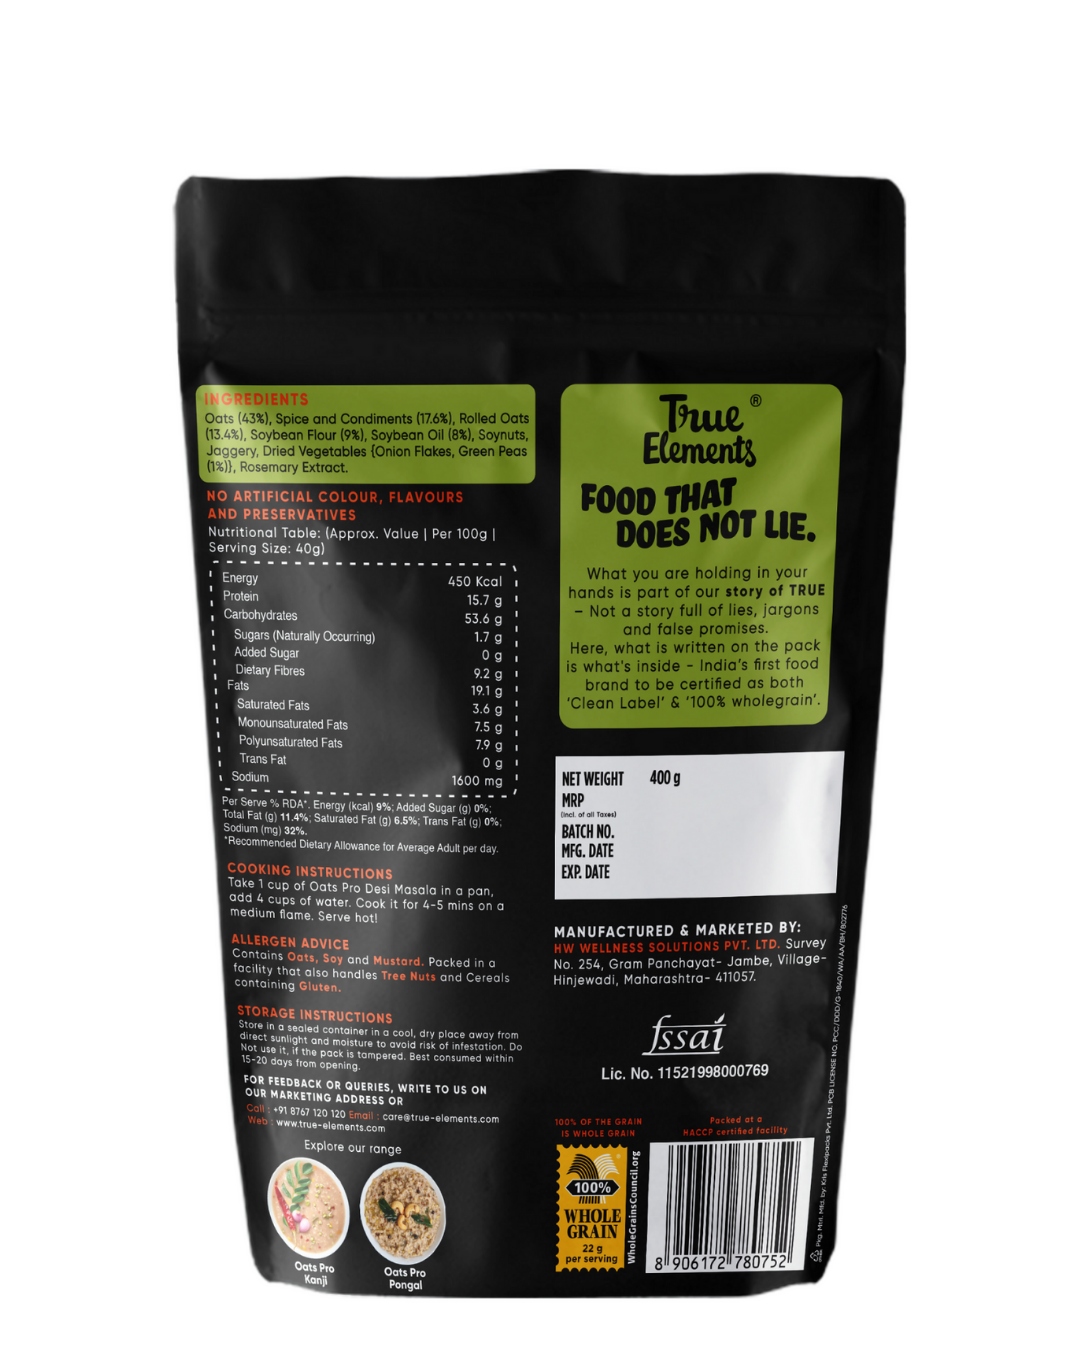 True Elements Oats Pro Desi Masala-Contains 15.7g Protein